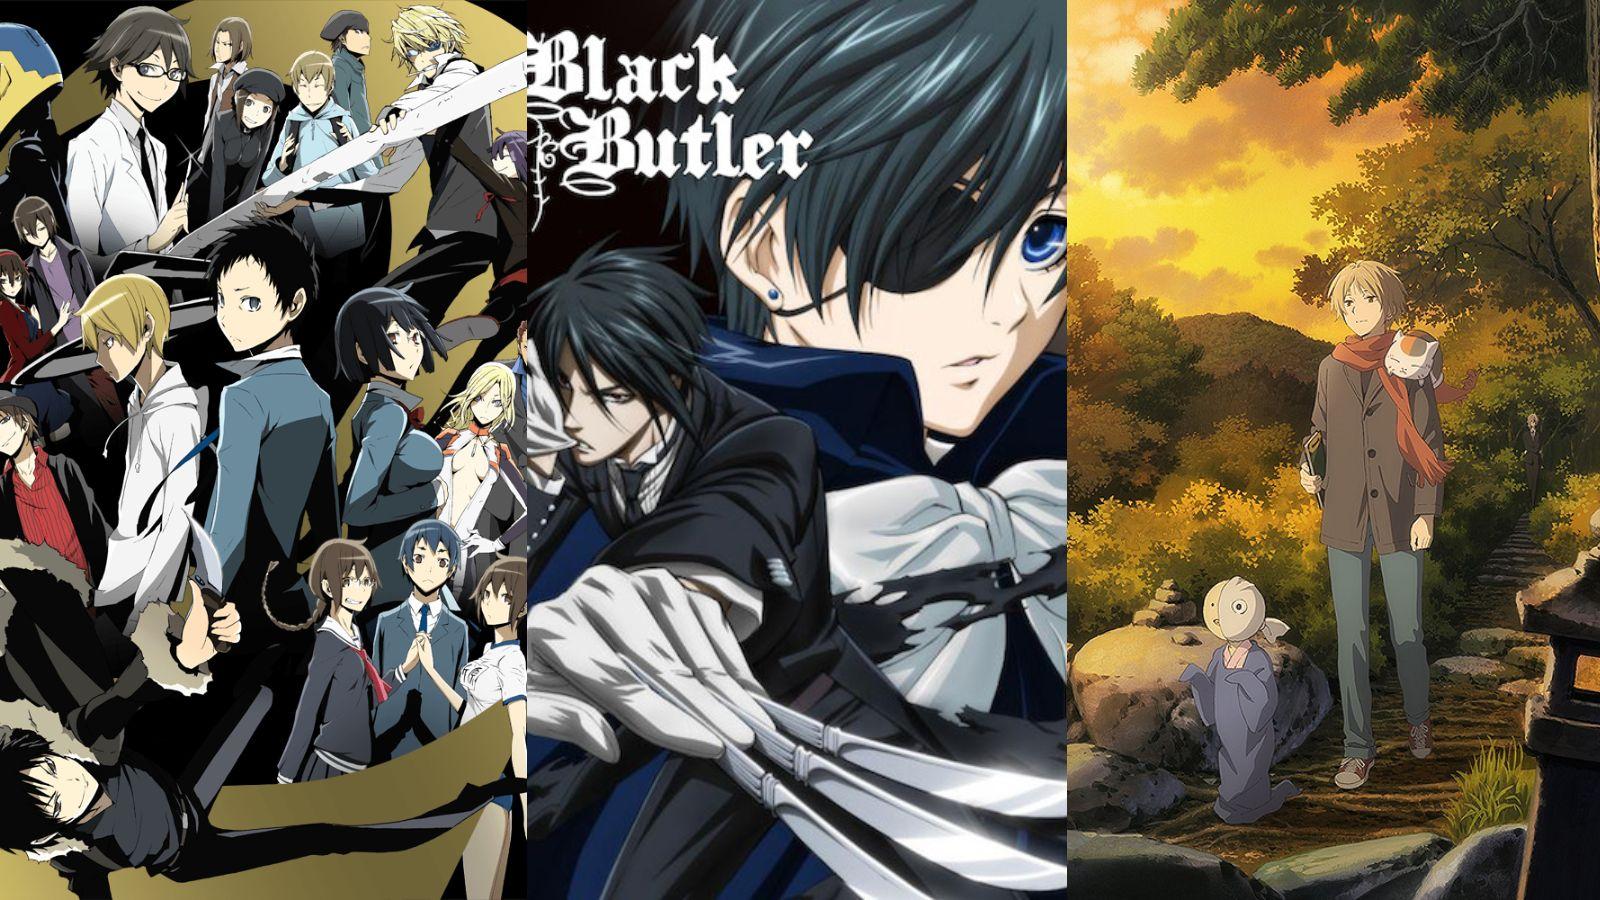 Underrated fantasy anime series